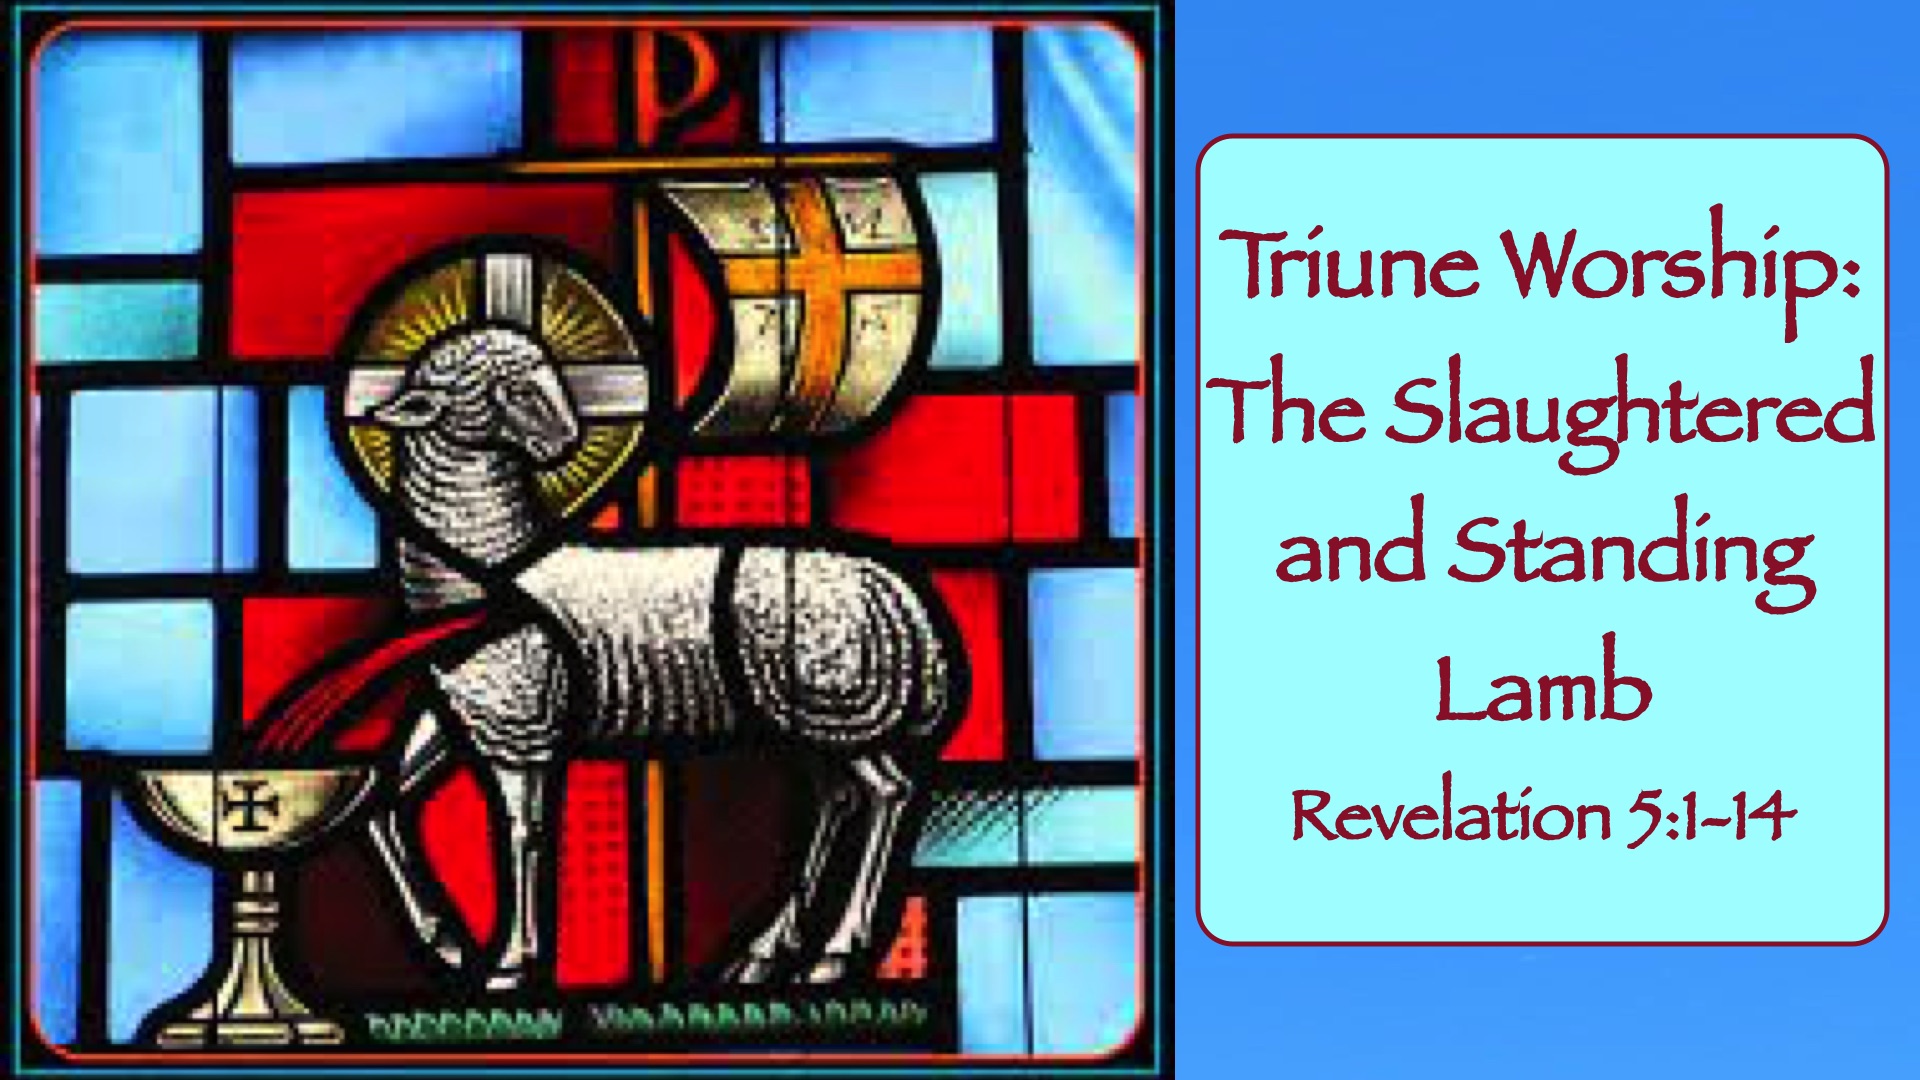 “Book of Revelation:  Triune Worship – The Slaughtered and Standing Lamb”